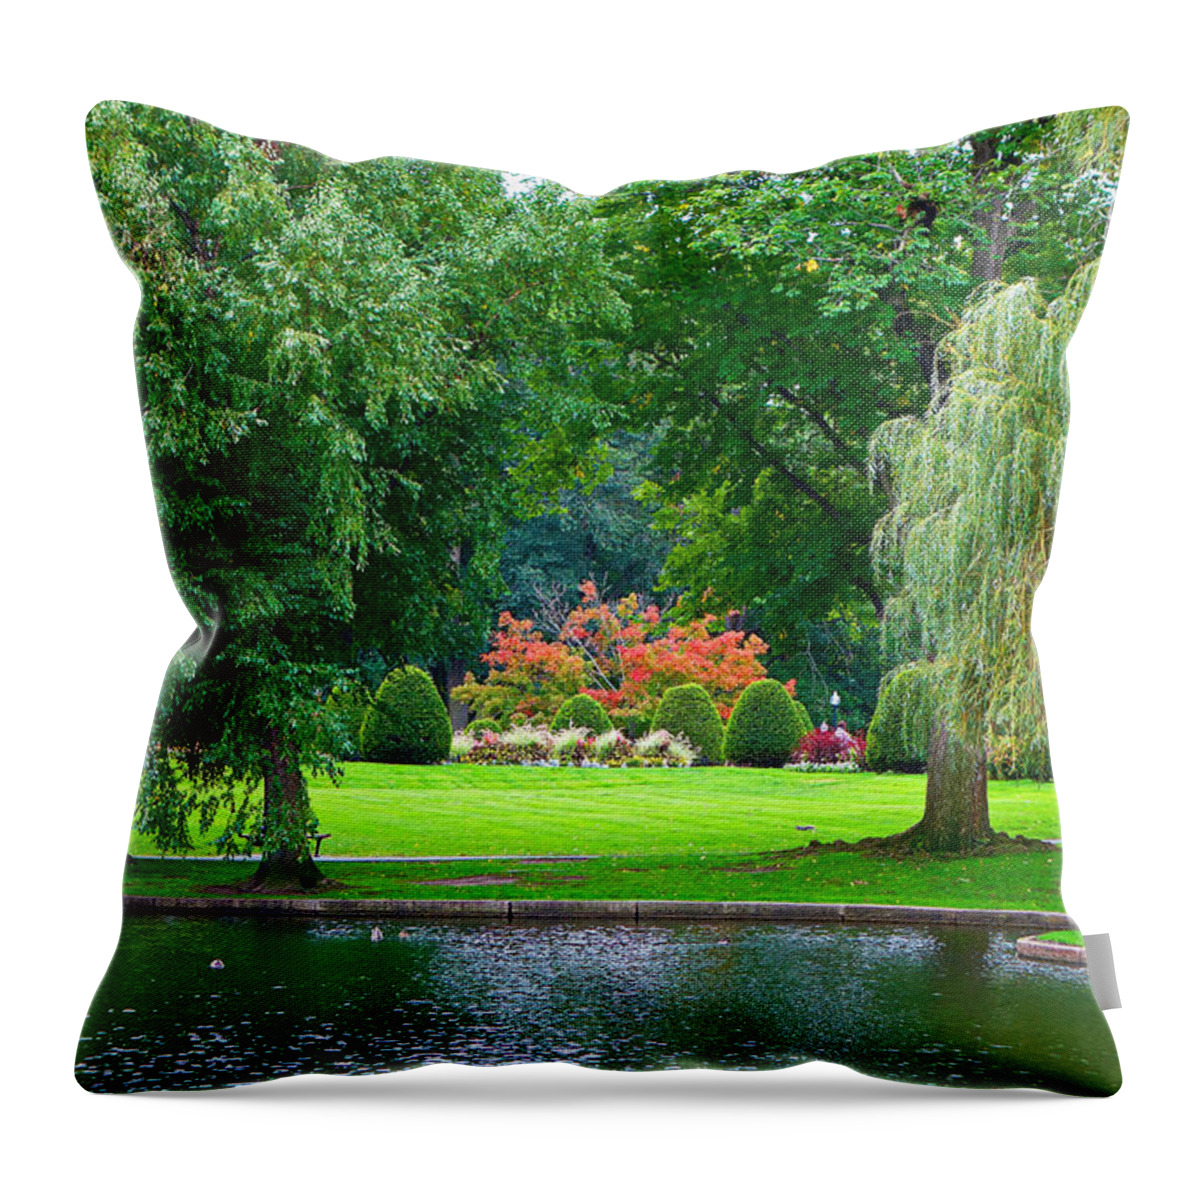 Boston Throw Pillow featuring the photograph Boston Common Study 3 by Robert Meyers-Lussier